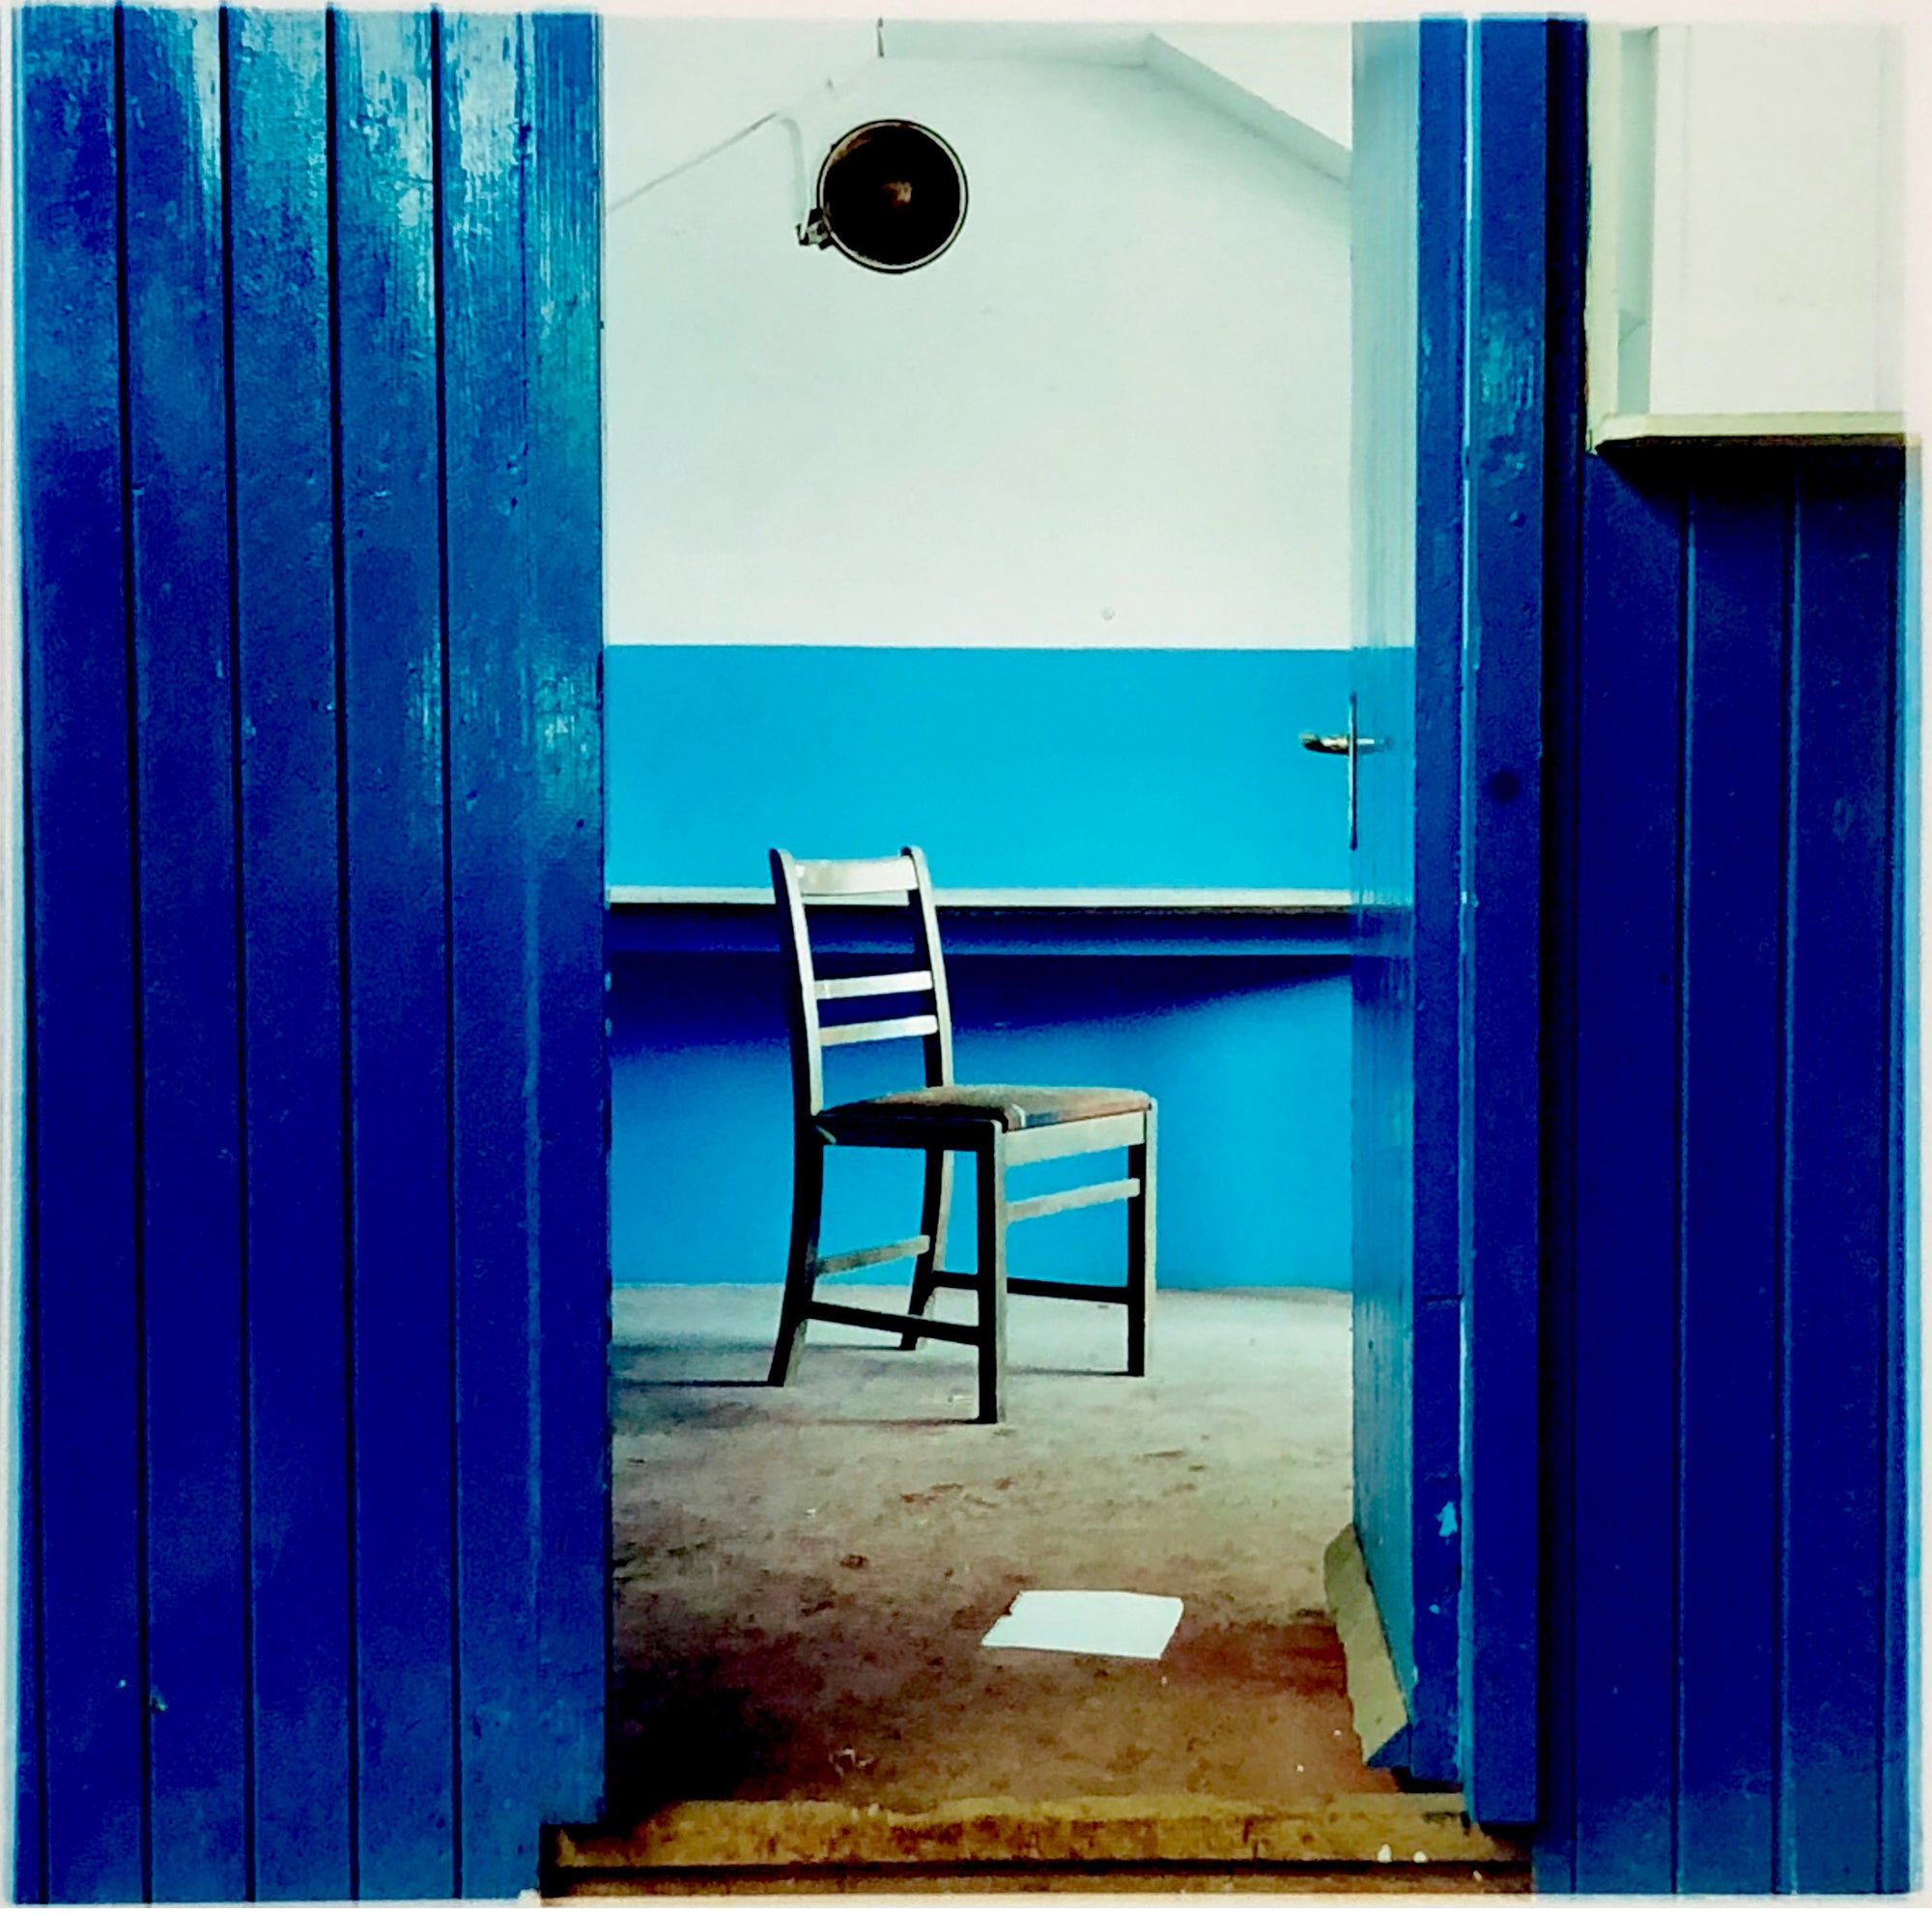 A blue painted room with a solitary chair visible through an open door